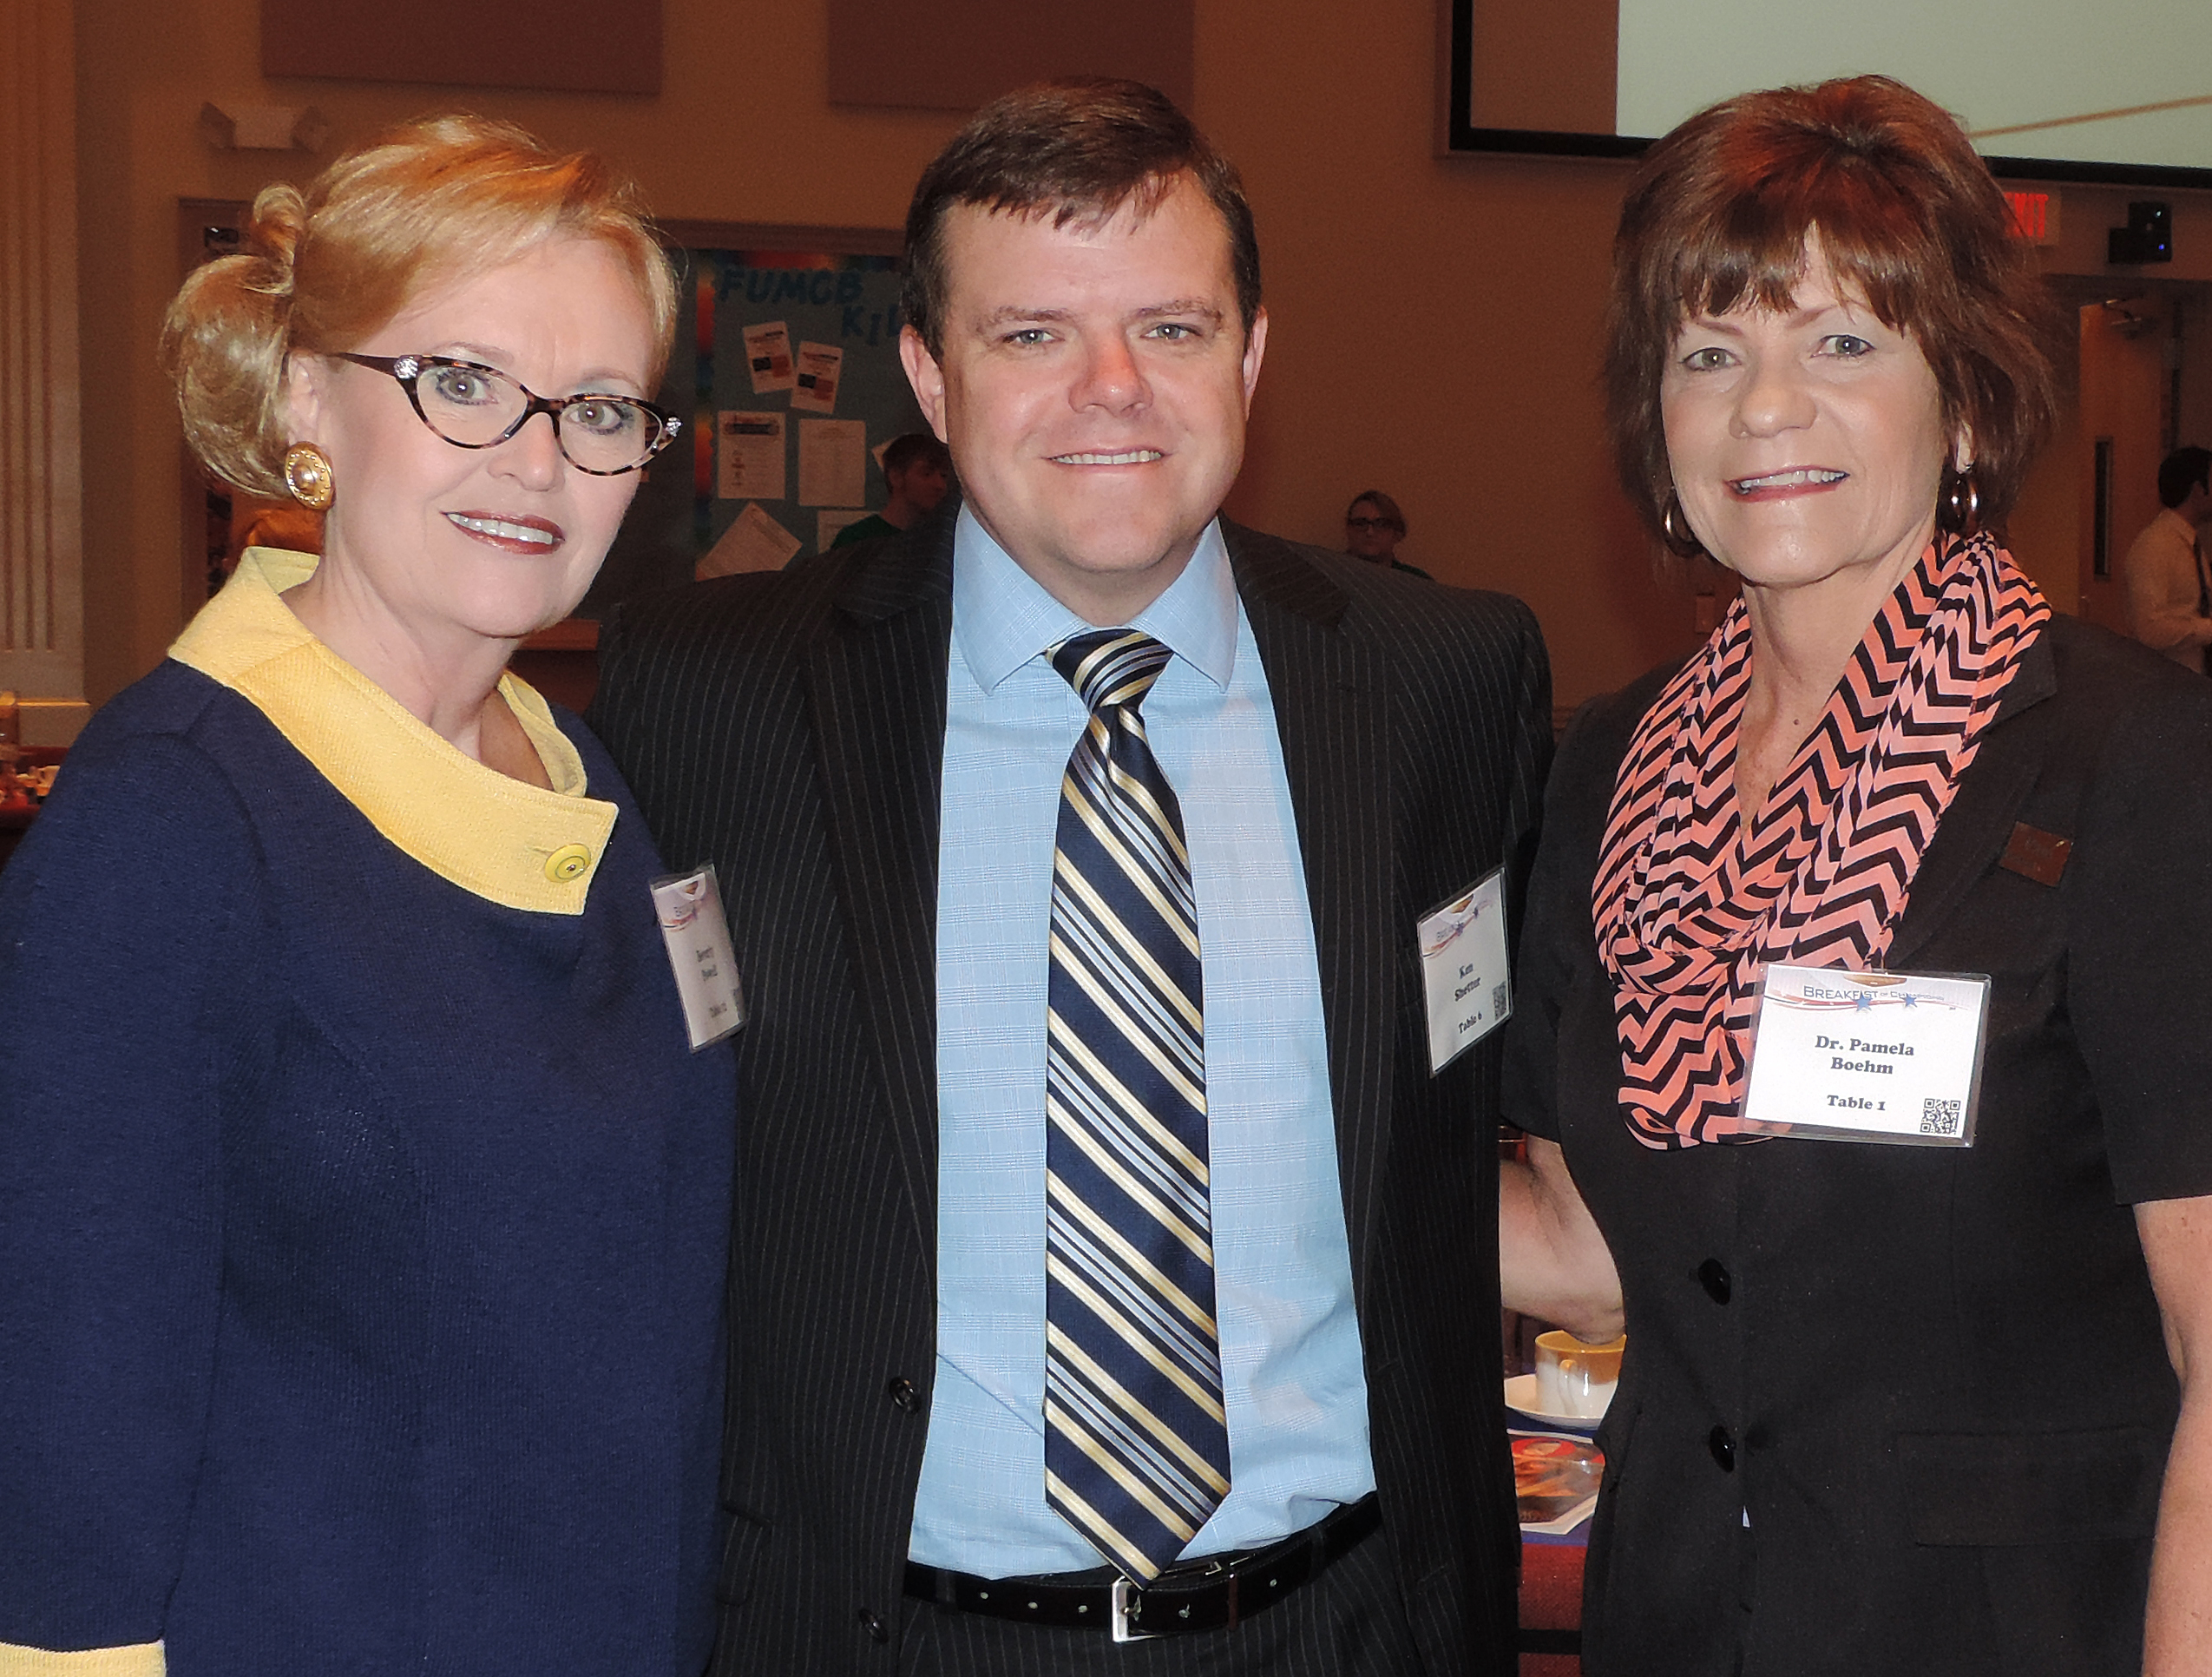 Burleson Opportunity Fund board members Beverly Volkman-Powell, chairman, Ken Shetter, Burleson Mayor, and Dr. Pamela Boehm, Hill College president, compare notes at the Breakfast of Champions held this week to benefit student scholarships.